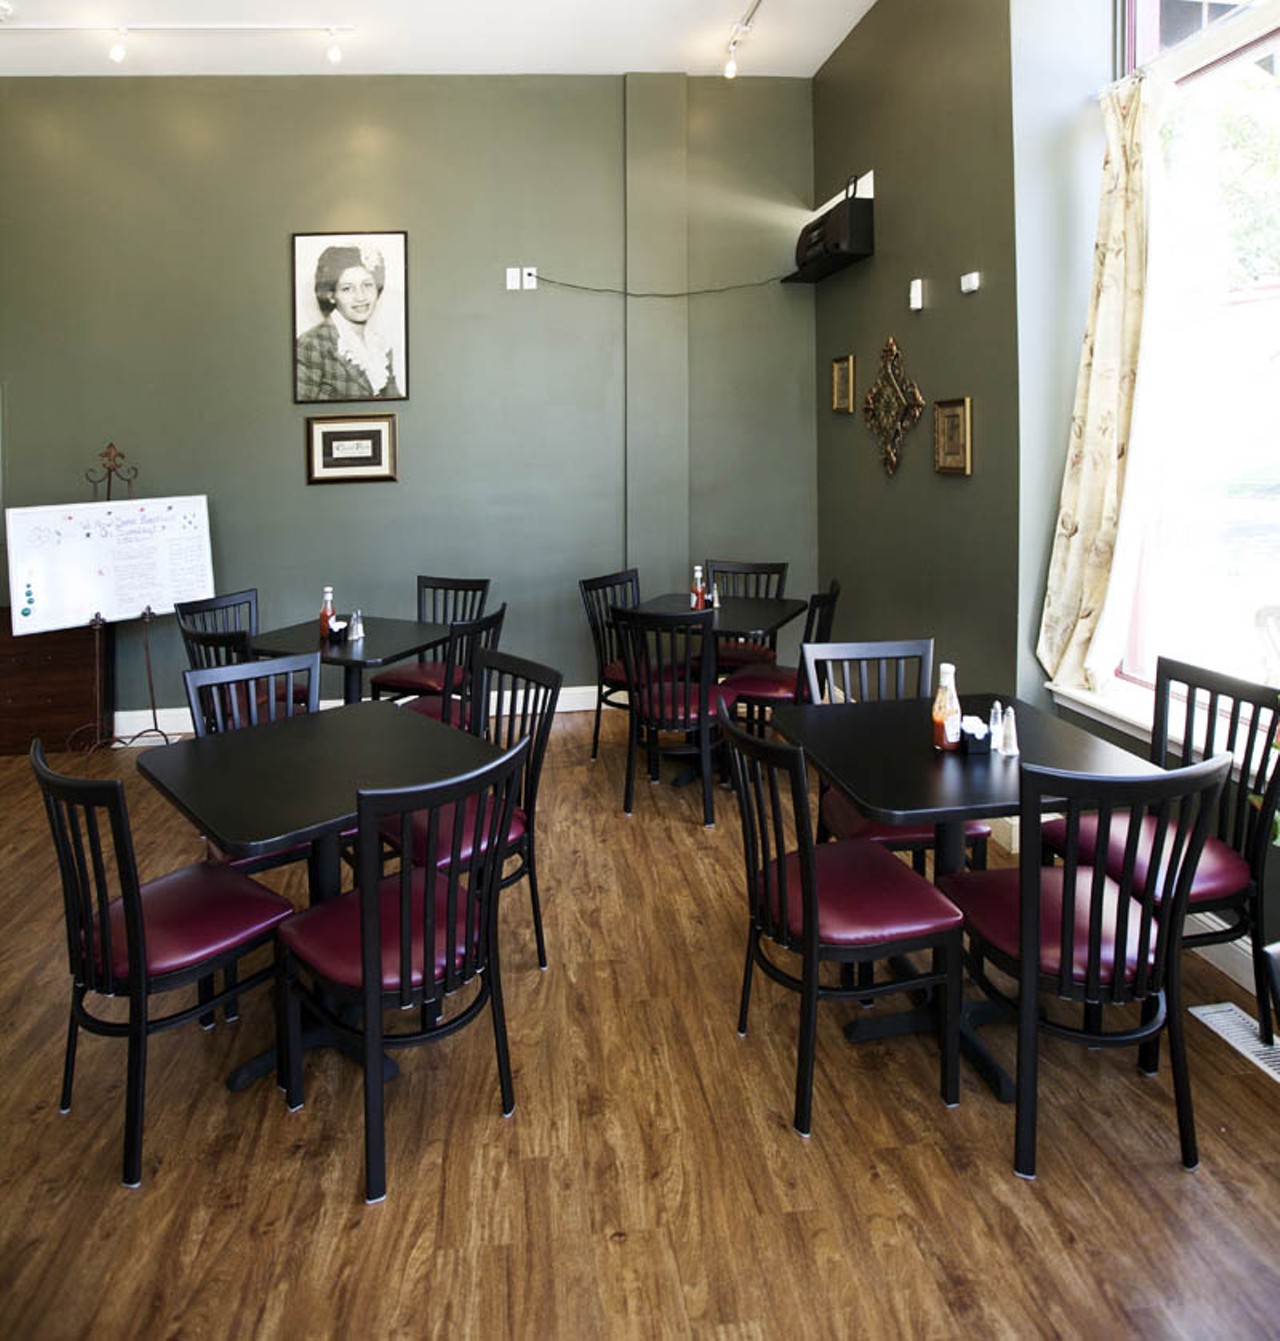 The interior of Mama Josephine's is intimate and welcoming.